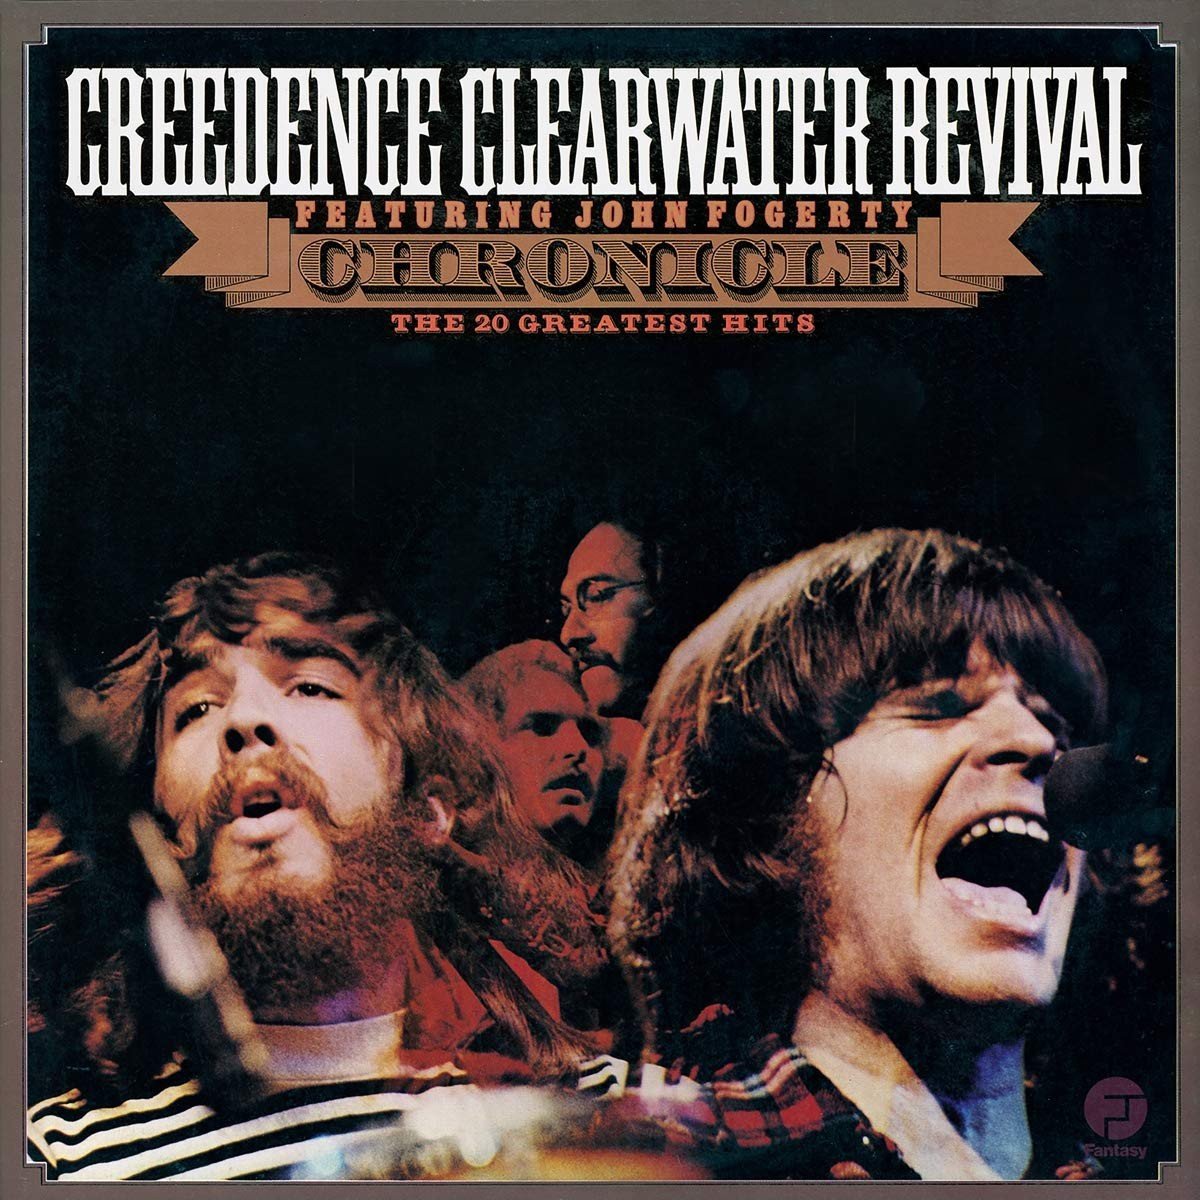 Lp Creedence Clearwater Revival - Chronicle